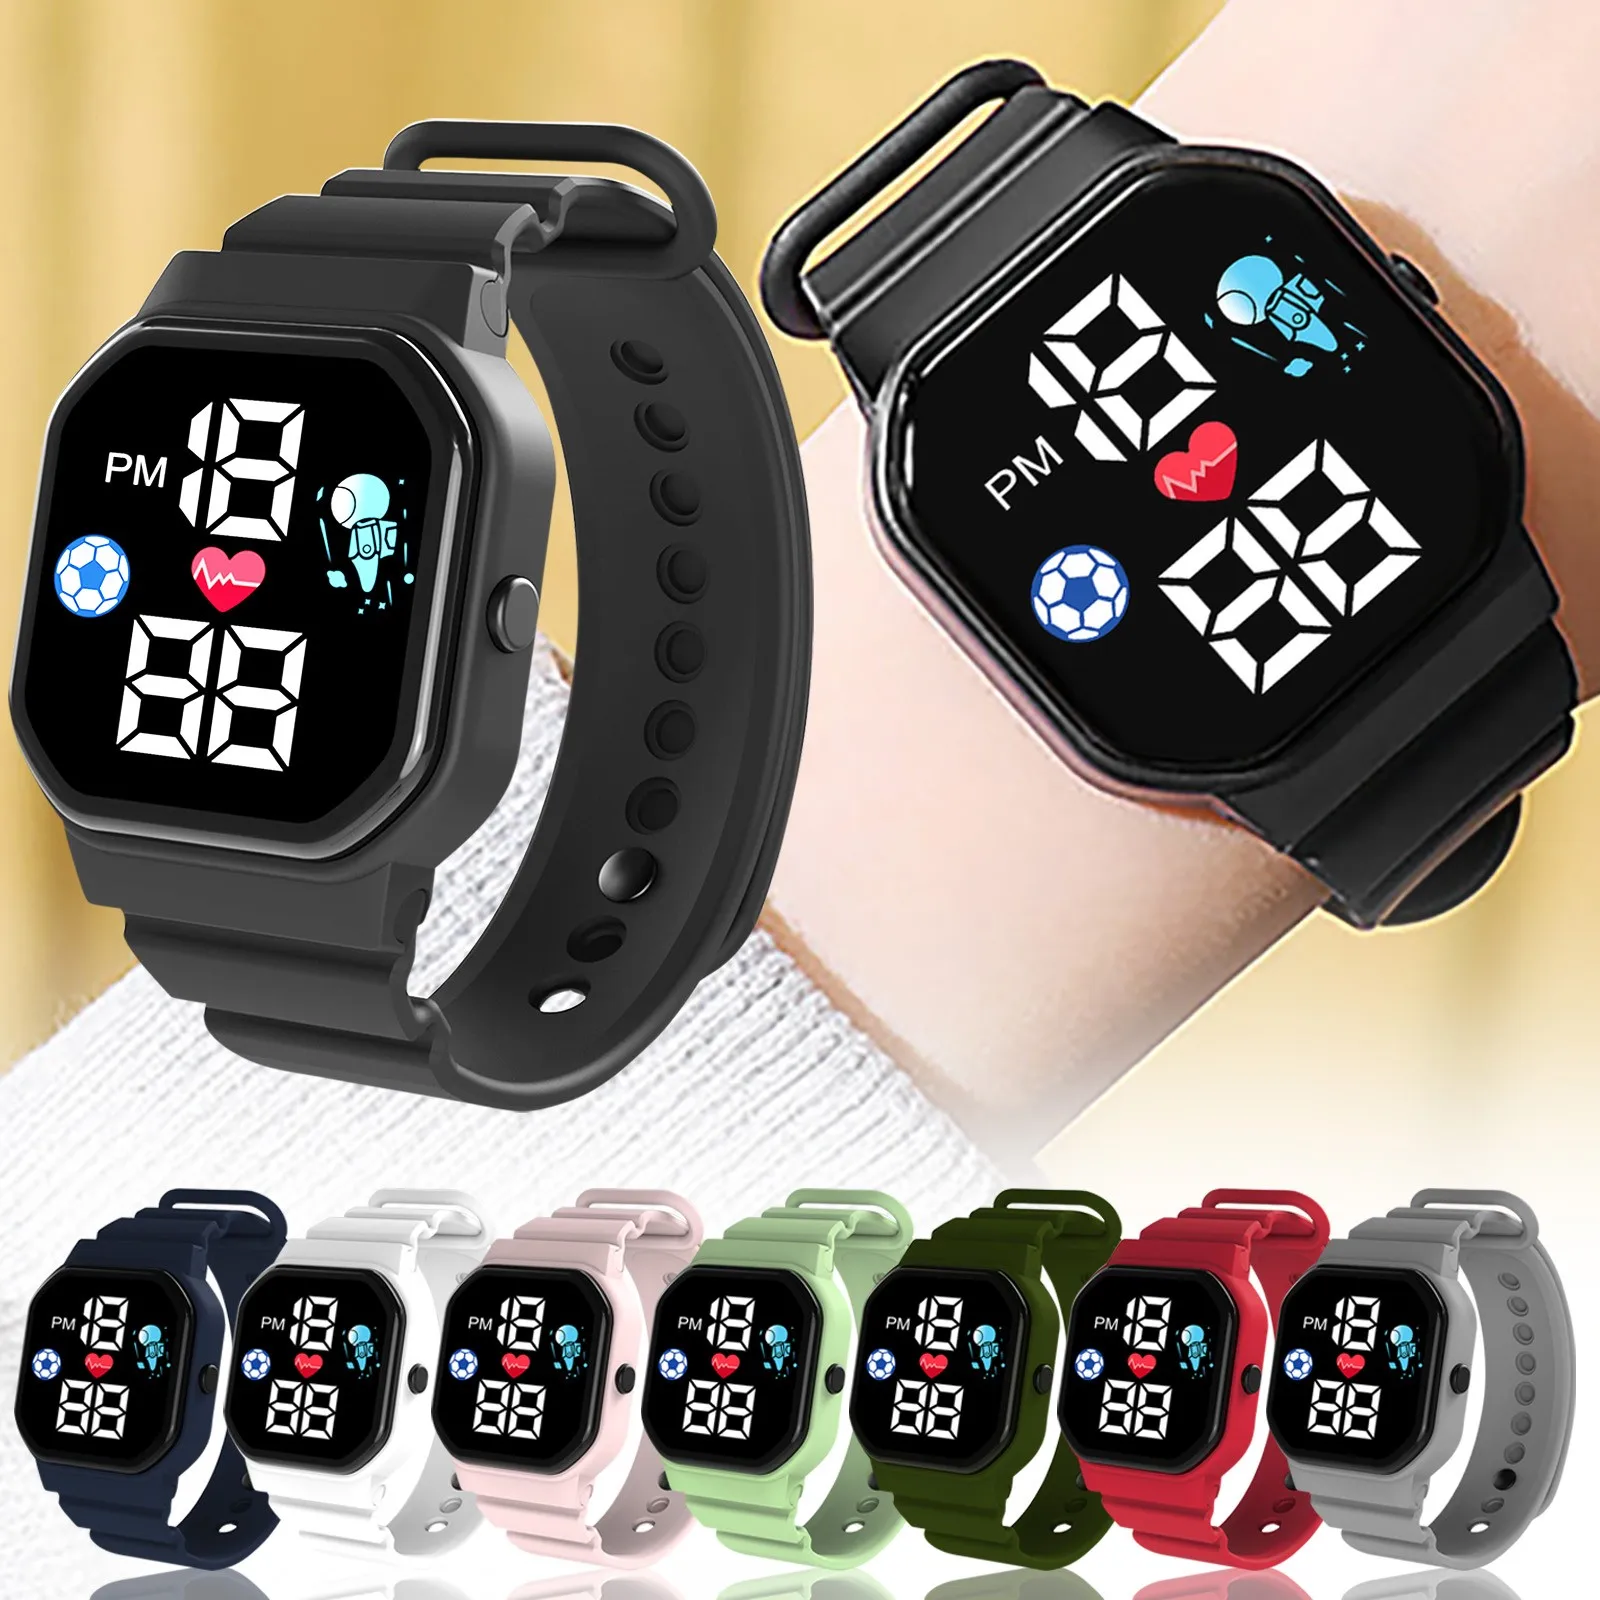 

Kawaii Waterproof Watches For Children Smart Display Week Suitable Digital Watches For Outdoor Sports Silicone montre enfant